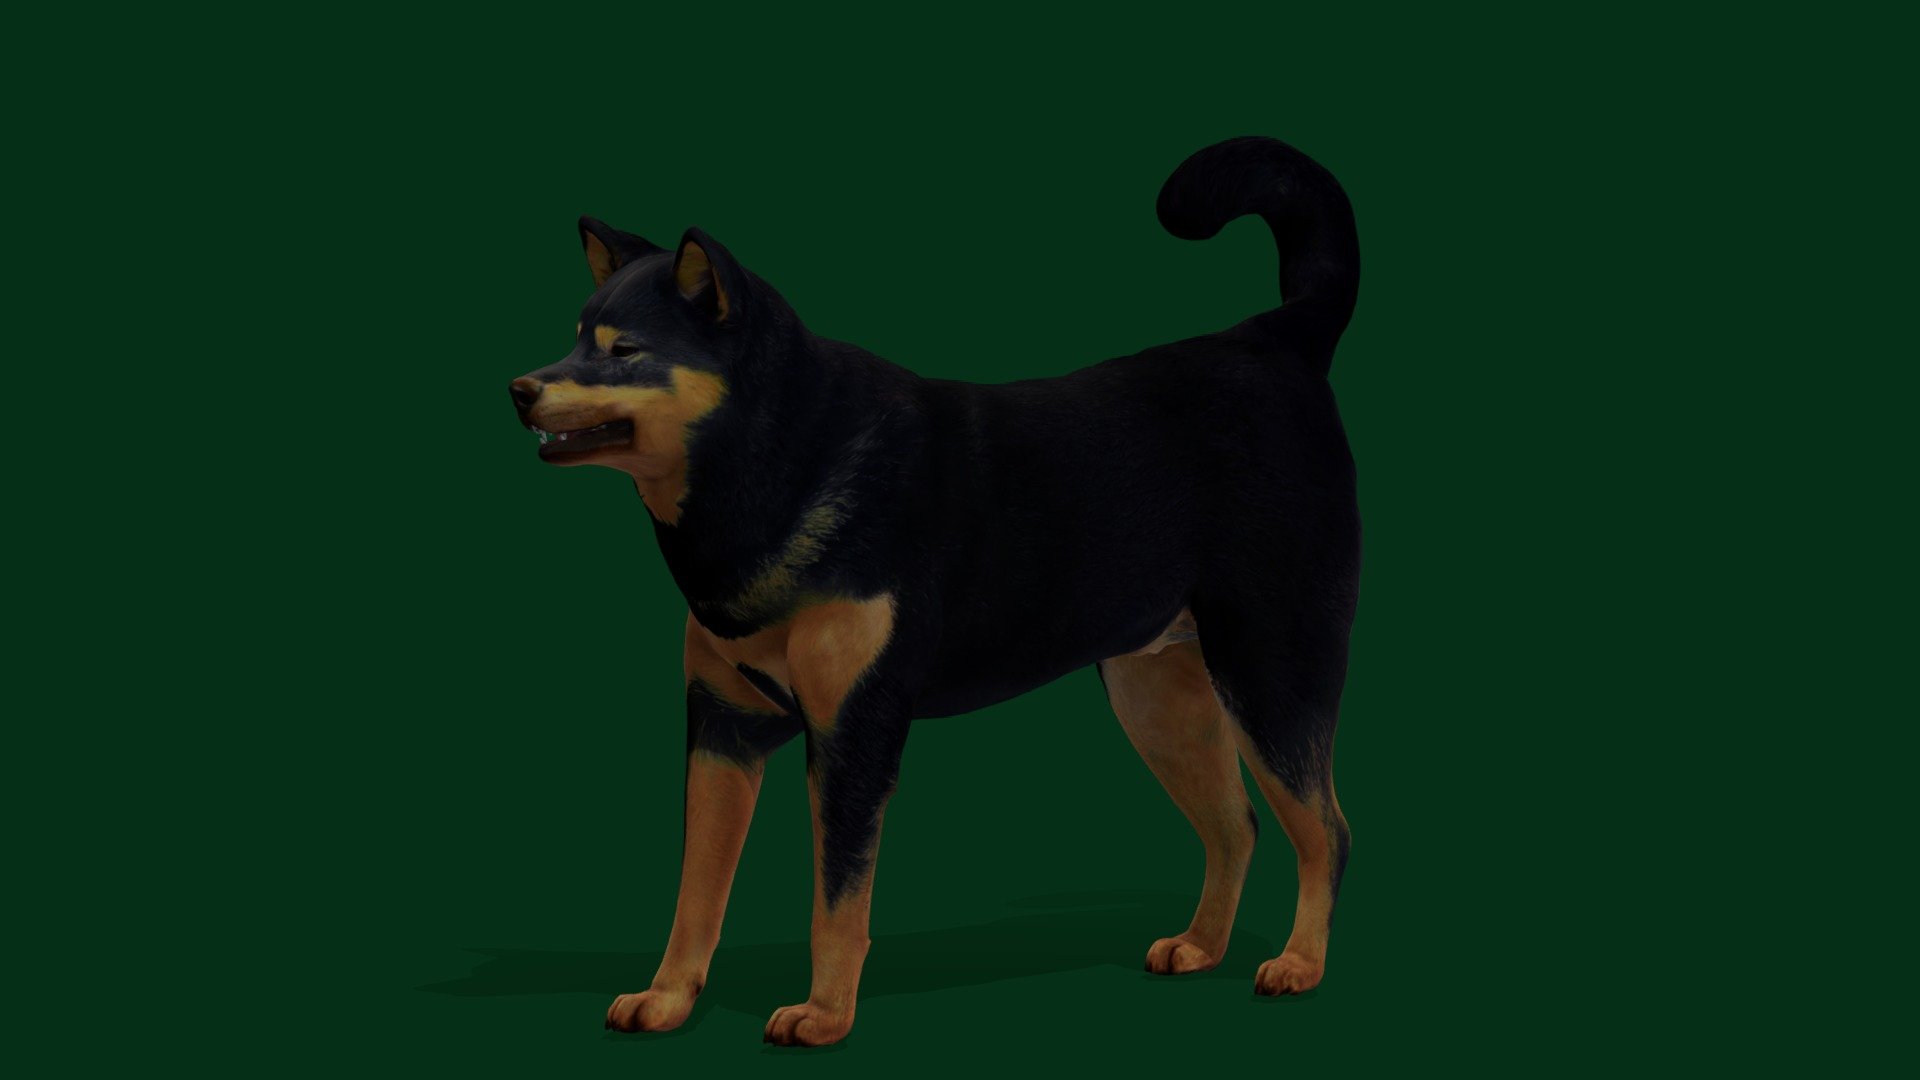 Shikoku Inu Dog Breed(Japan_Inu Breed)  Kōchi-ken ,national-treasure Dog ,medium-sized, rare dog breed

Canis lupus familiaris Animal Mammal(guarding Dog)Pet,Shikoku island Japan

1 Draw Calls

MidPoly

Game Ready Asset

Subdivision Surface Ready

9- Animations

4K PBR Textures Material

Unreal FBX (Unreal 4,5 Plus)

Unity FBX

Blend File 3.6.5 LTS

USDZ File (AR Ready). Real Scale Dimension (Xcode ,Reality Composer, Keynote Ready)

Textures Files

GLB File (Unreal 5.1 Plus Native Support)


Gltf File ( Spark AR, Lens Studio(SnapChat) , Effector(Tiktok) , Spline, Play Canvas,Omiverse ) Compatible




Triangles -54574



Faces -31508

Edges -58866

Vertices -27363

Diffuse, Metallic, Roughness , Normal Map ,Specular Map,AO

The Shikoku Inu or Kōchi-ken is a Japanese breed of dog from Shikoku island. It was designated by Japan as a culturally important national treasure in 1937.
 - Kōchi-Ken Inu Dog Breed (Game Ready) - Buy Royalty Free 3D model by Nyilonelycompany 3d model